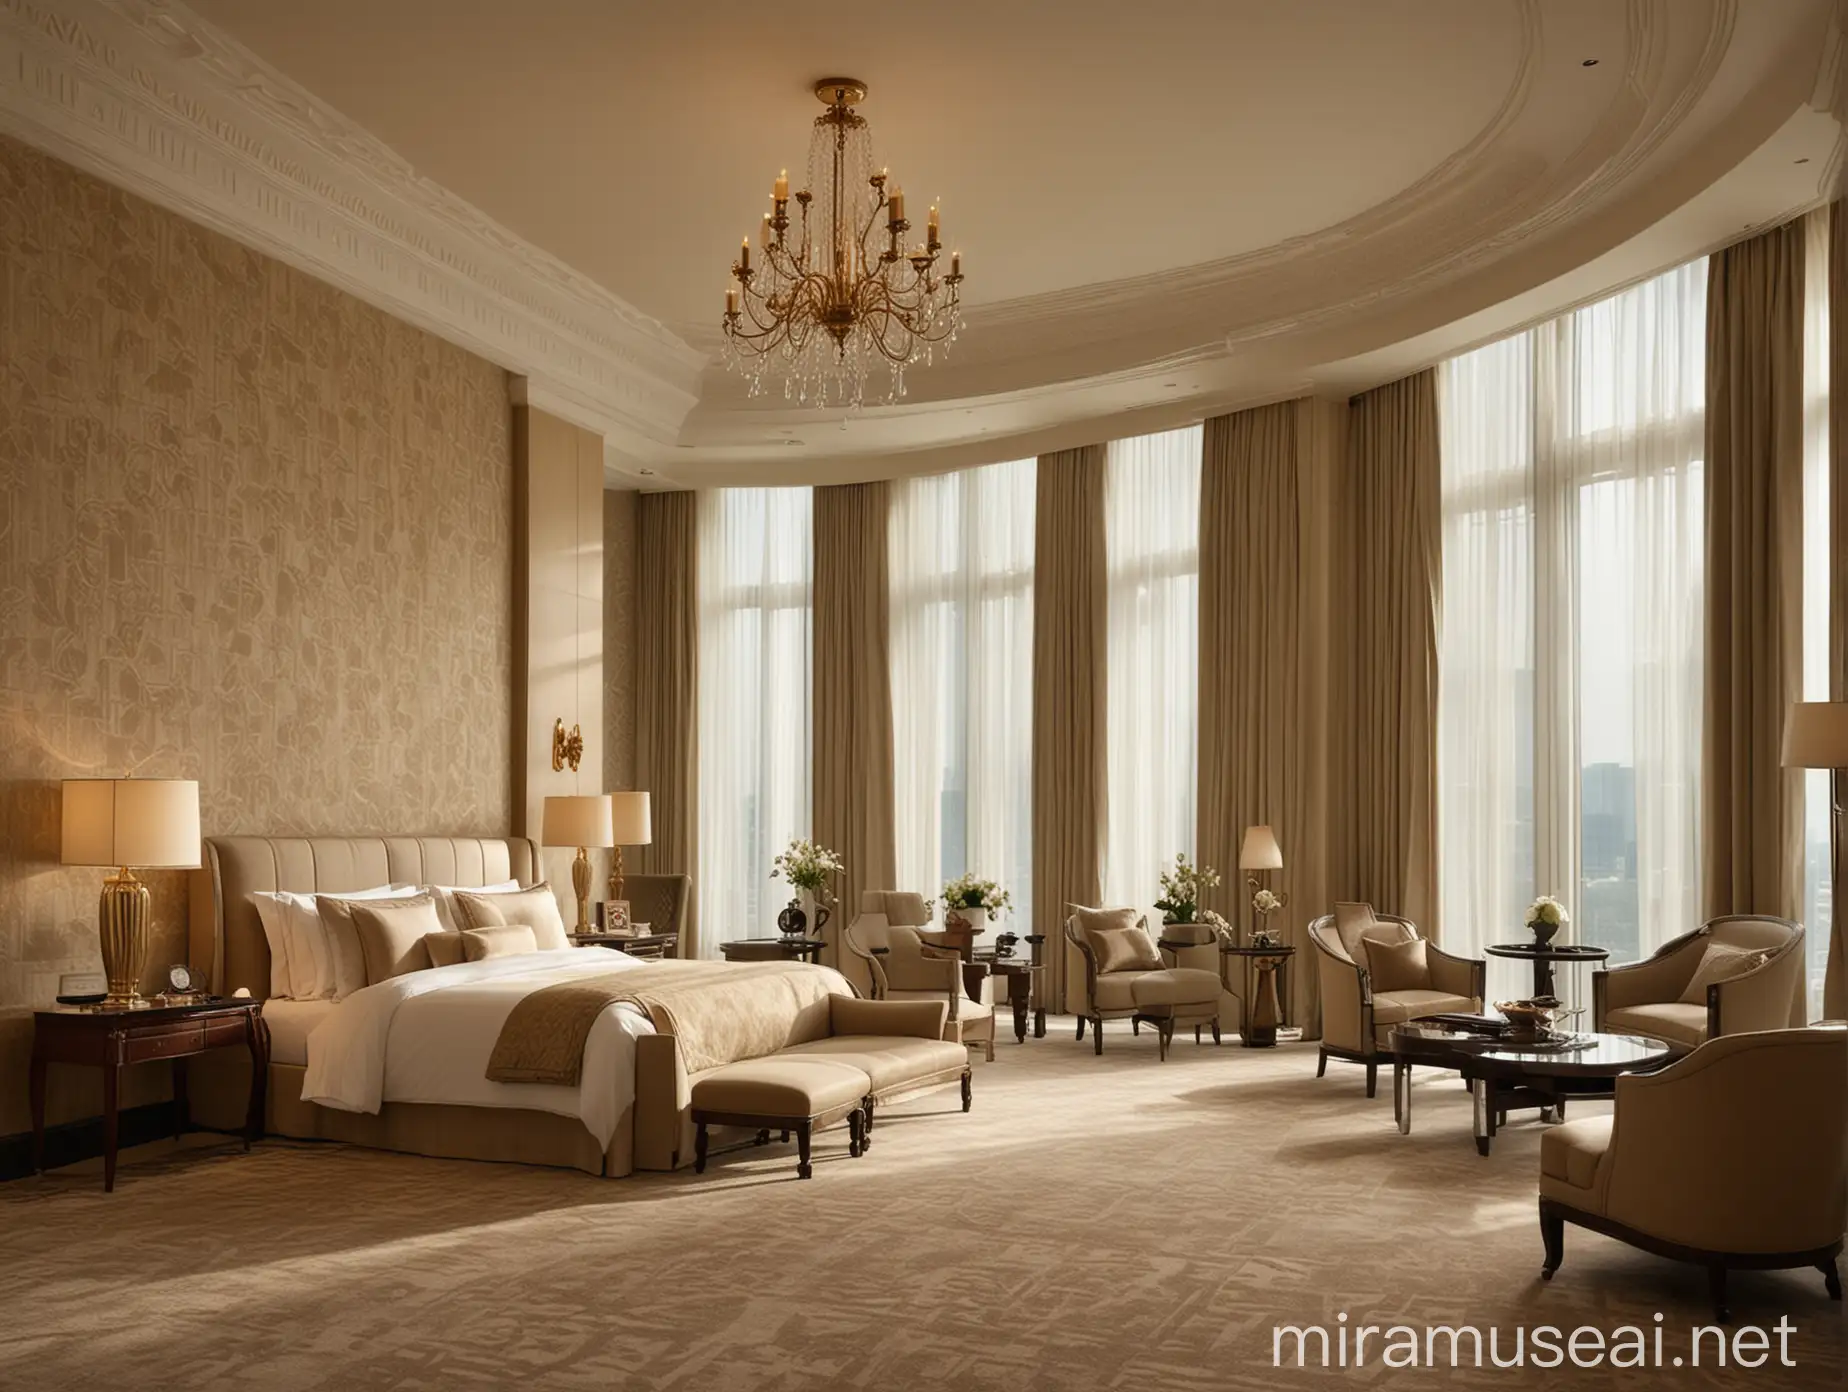 The “environment” we’re going for is a high end hotel Waldorf Astoria : Kuala Lumpur, that conveys an expensive, destination vacation vibe. The interiors should be classy / timeless, with layered textures, with larger than life scale, muted
warm tones for walls, tapestry and furniture. Daylight shoot.